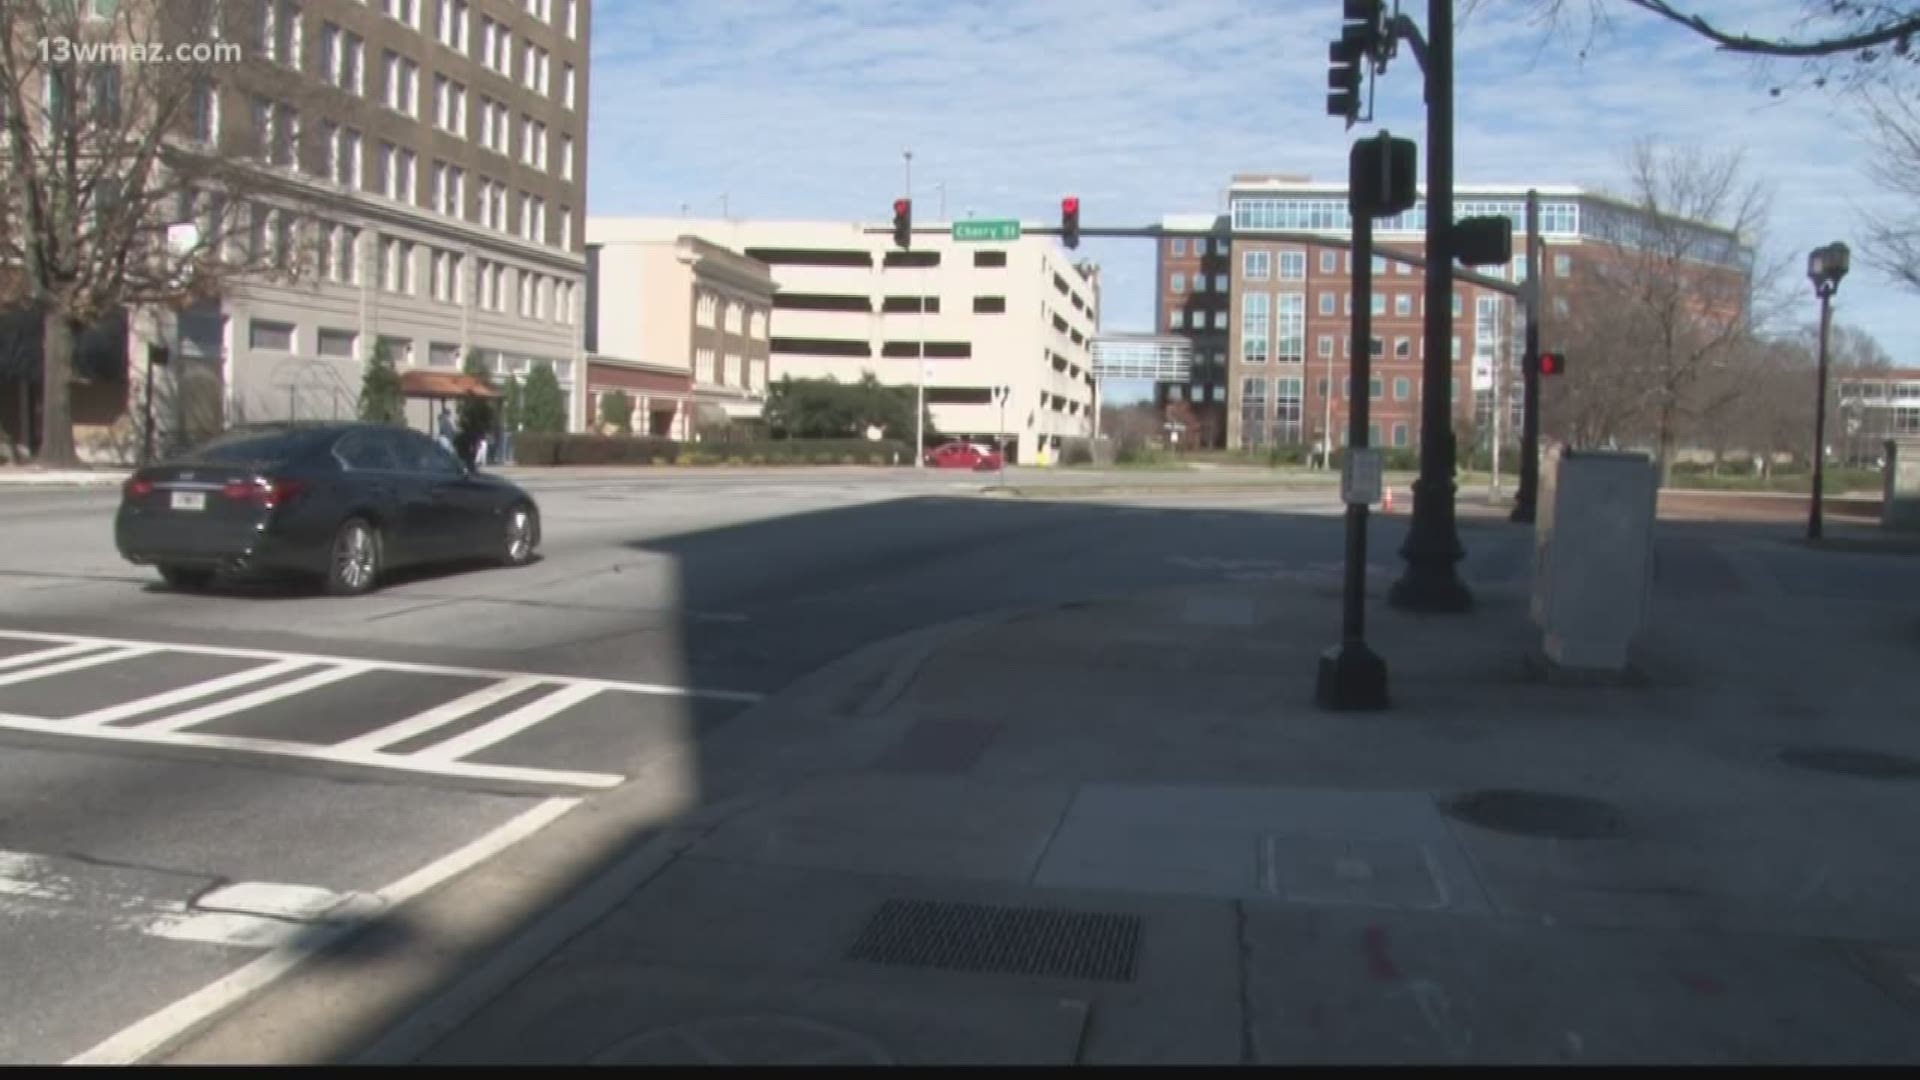 One downtown Macon business owner says speeders and red-light runners at an intersection near his club are driving him crazy. He has a suggestion for the city too.